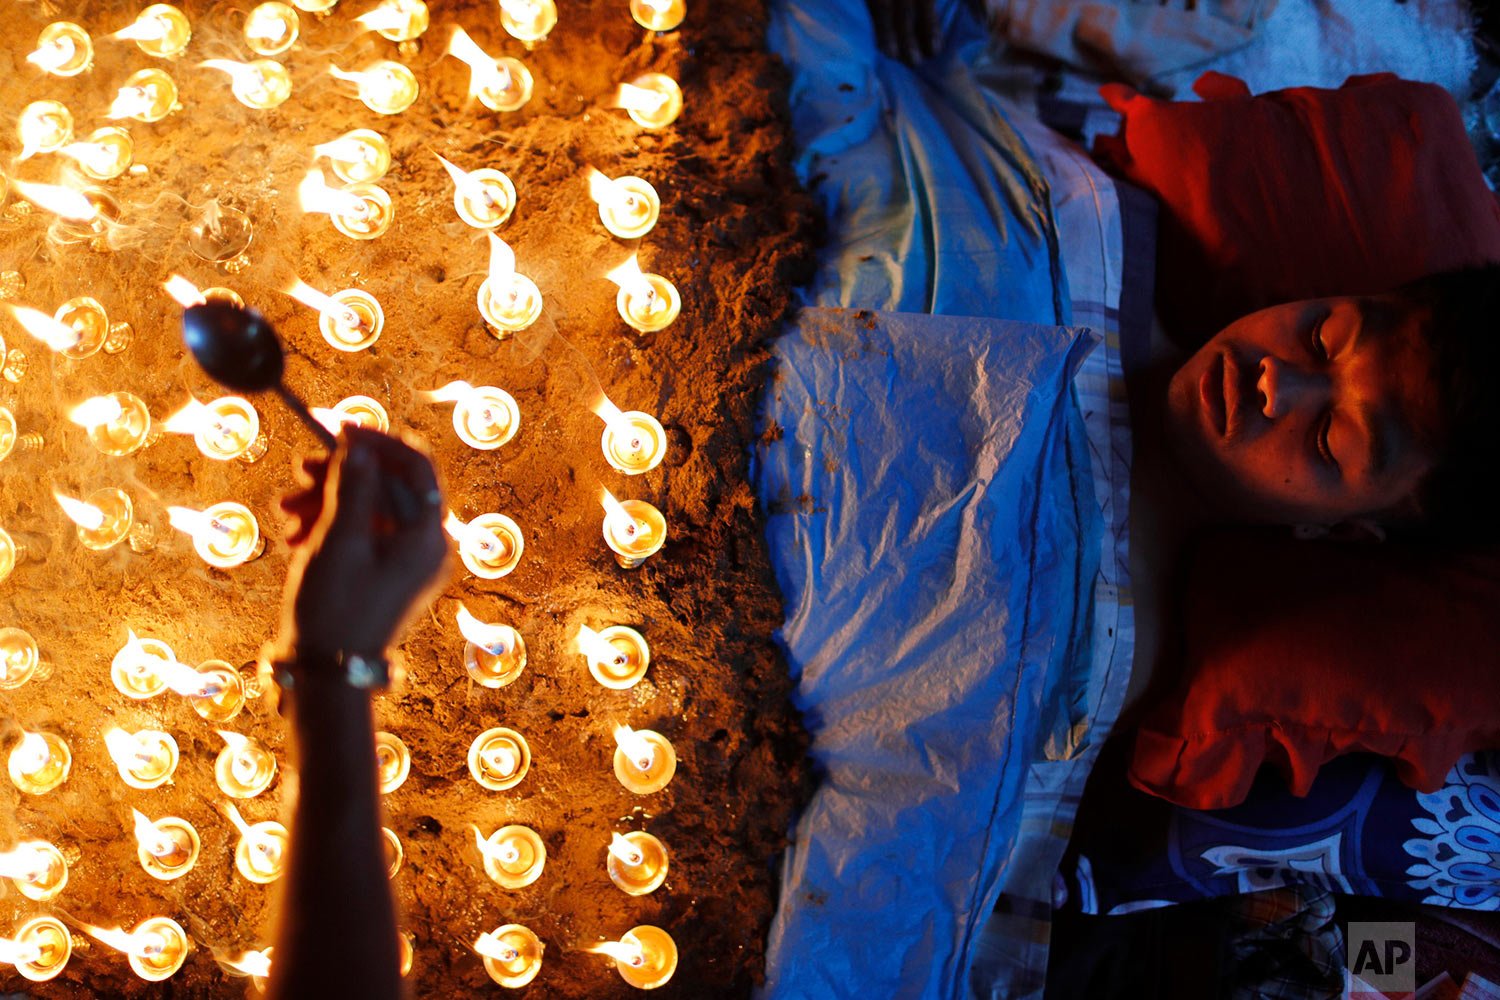  A man lies still as devotees light oil lamps over his body as part of rituals to celebrate the tenth and final day of Dashain festival in Bhaktapur, Nepal, Friday, Oct. 15, 2021. (AP Photo/Niranjan Shrestha) 